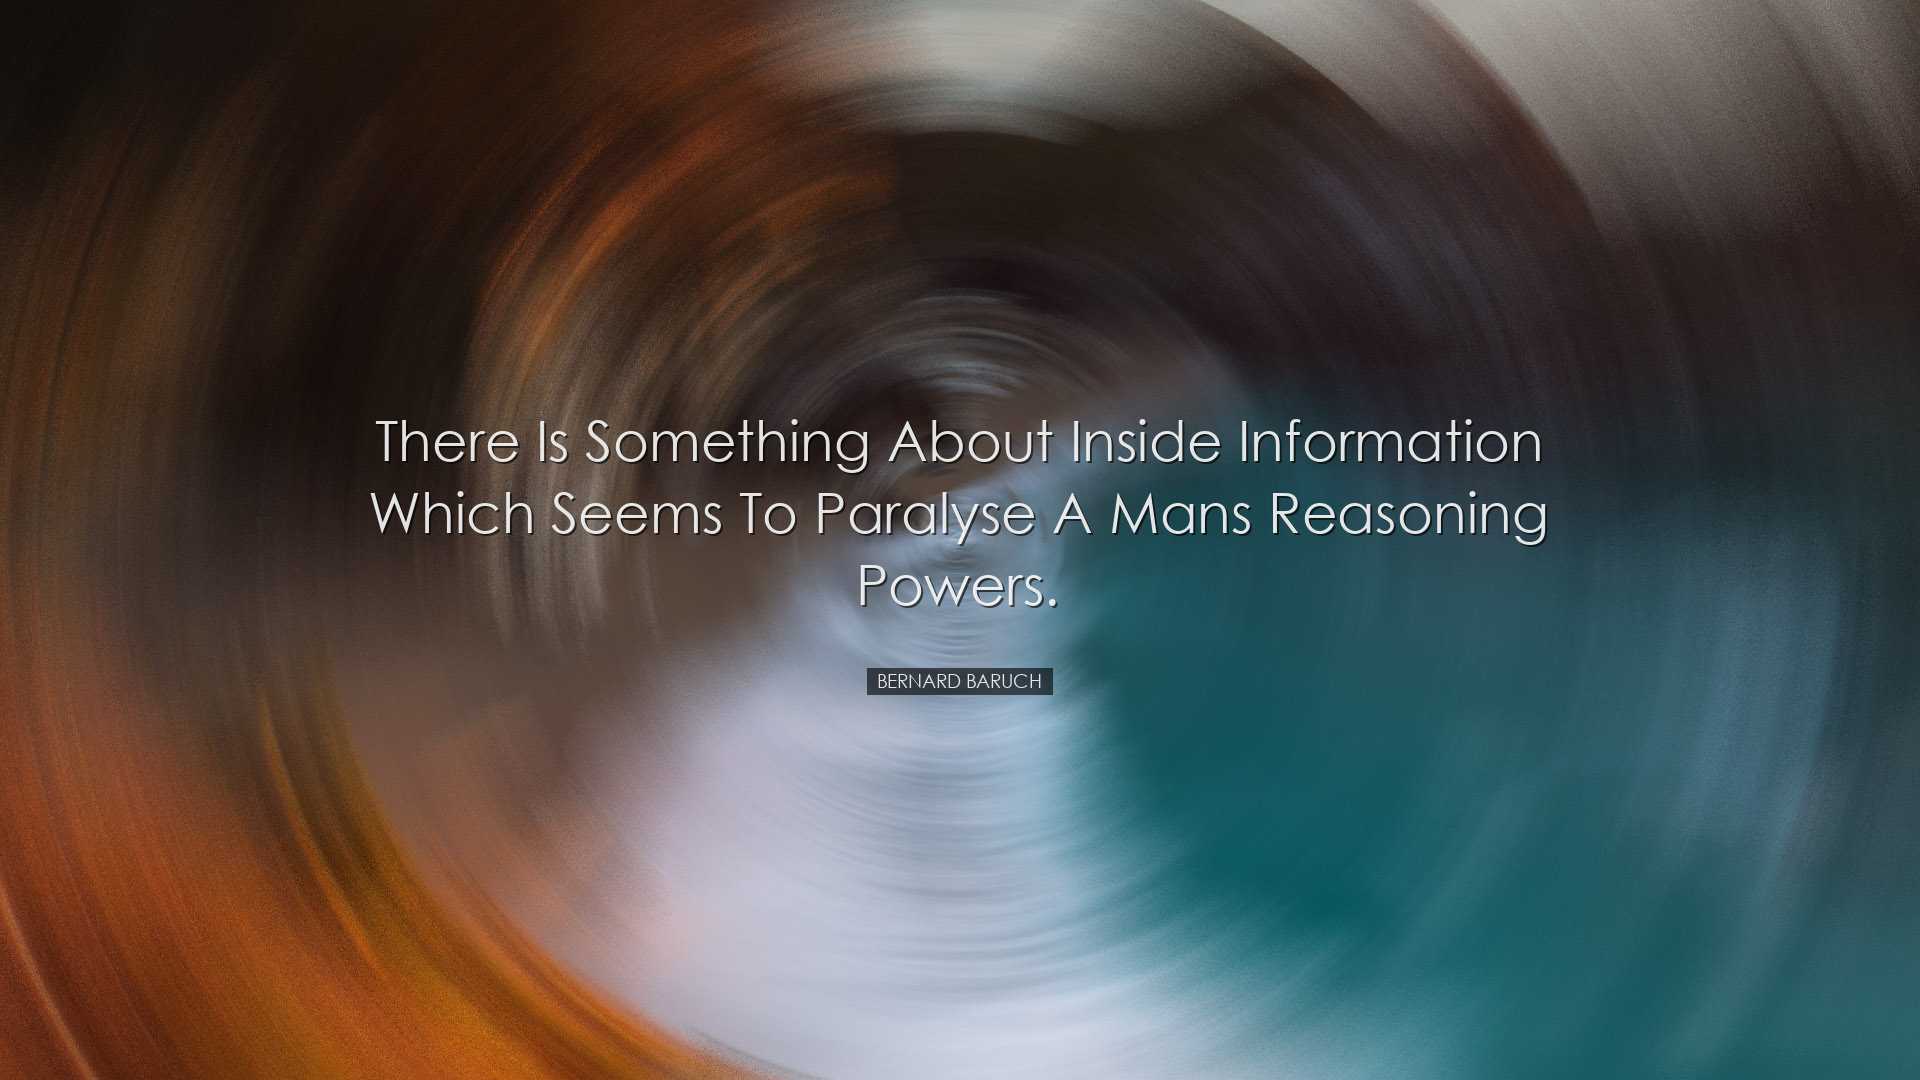 There is something about inside information which seems to paralys